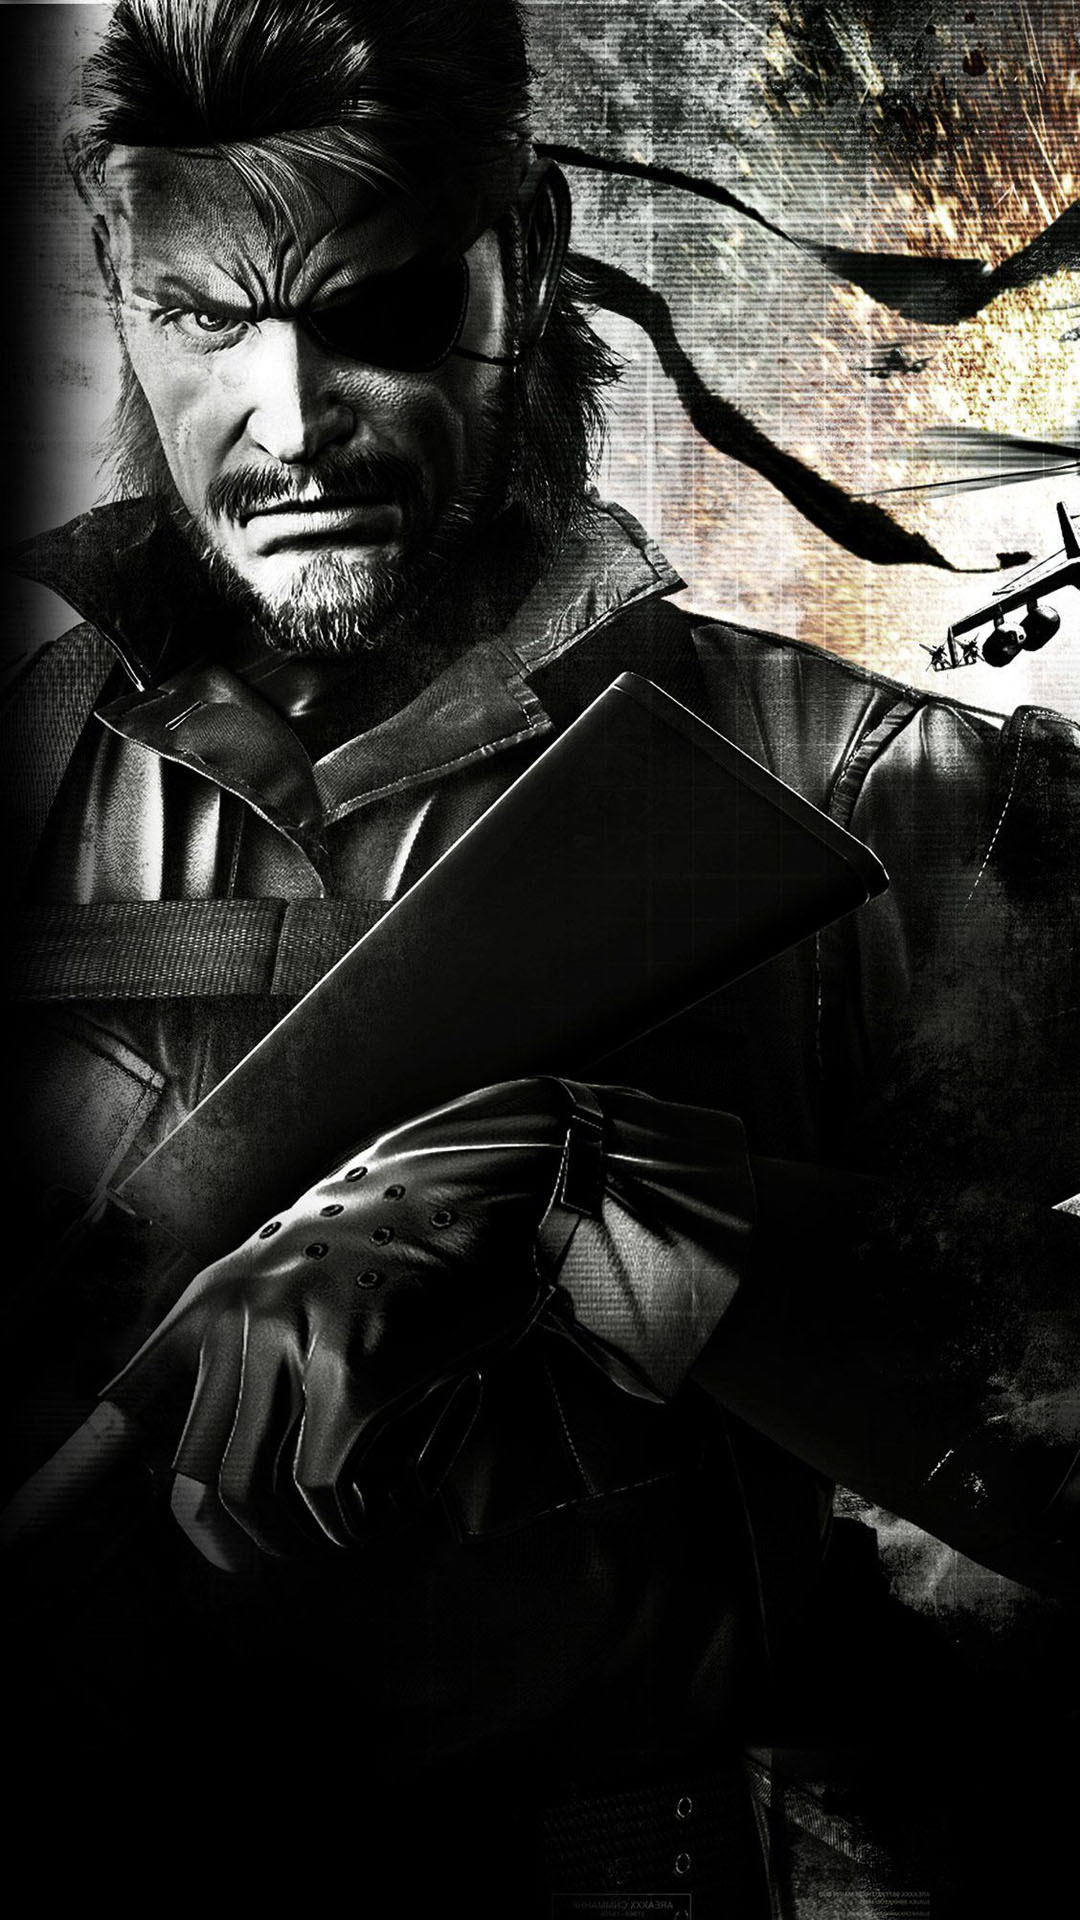 metal gear iphone wallpaper,fictional character,batman,darkness,movie,black and white